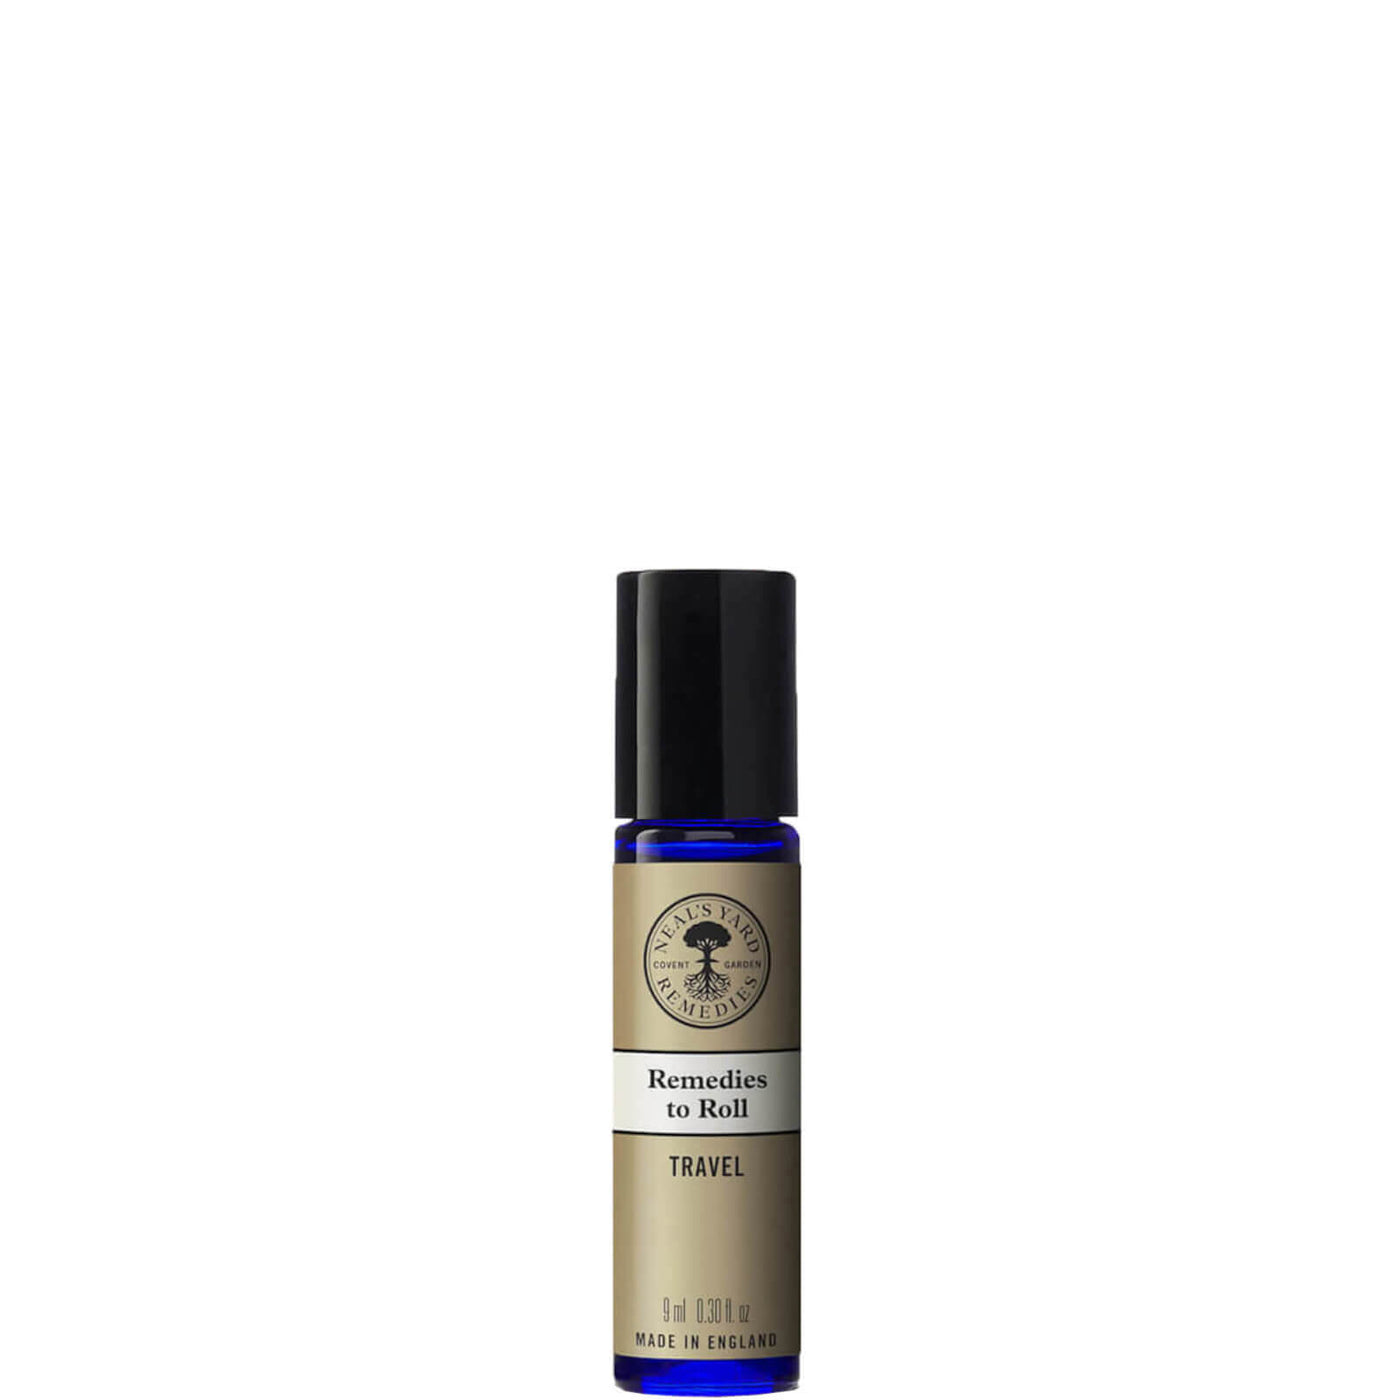 Neal's Yard Remedies to Roll Travel Blend 9ml